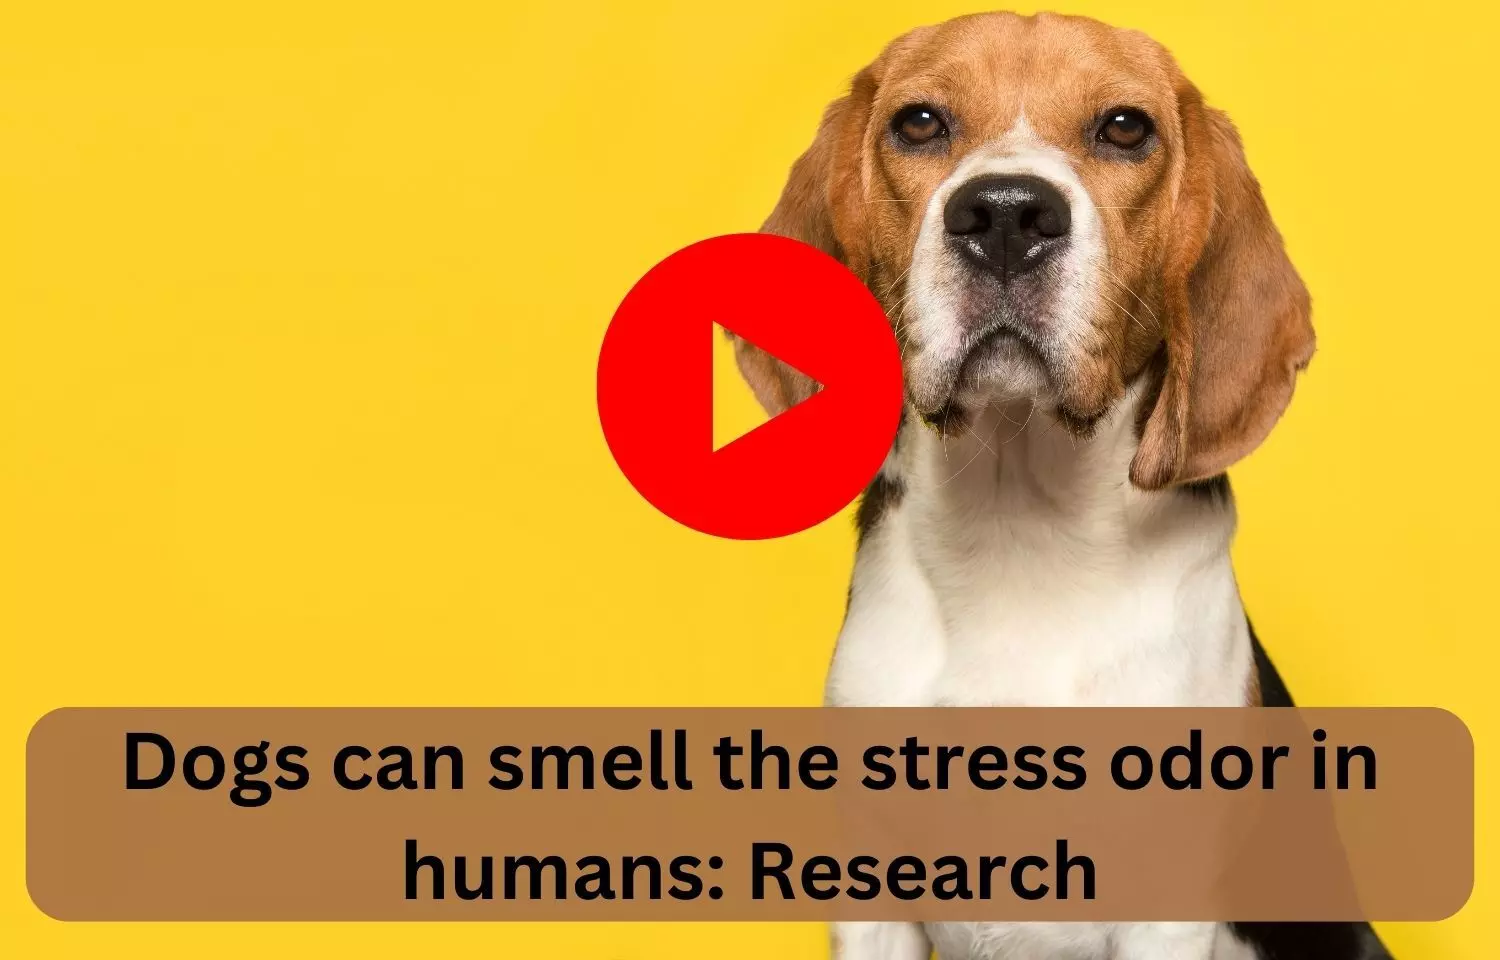 Dogs can smell the stress odor in humans: Research